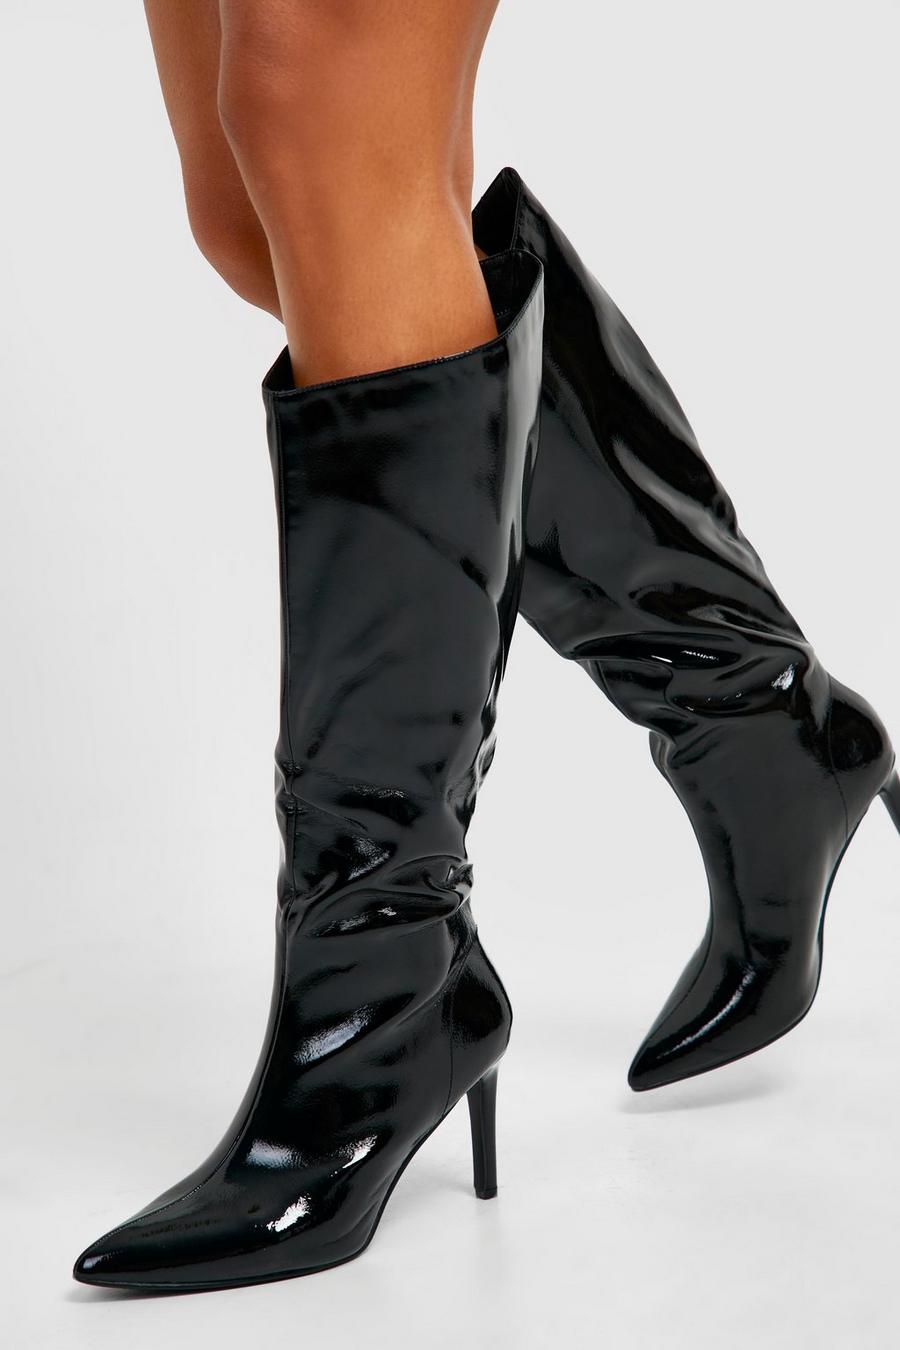 Black Asymmetric Pointed Toe Knee High Boots